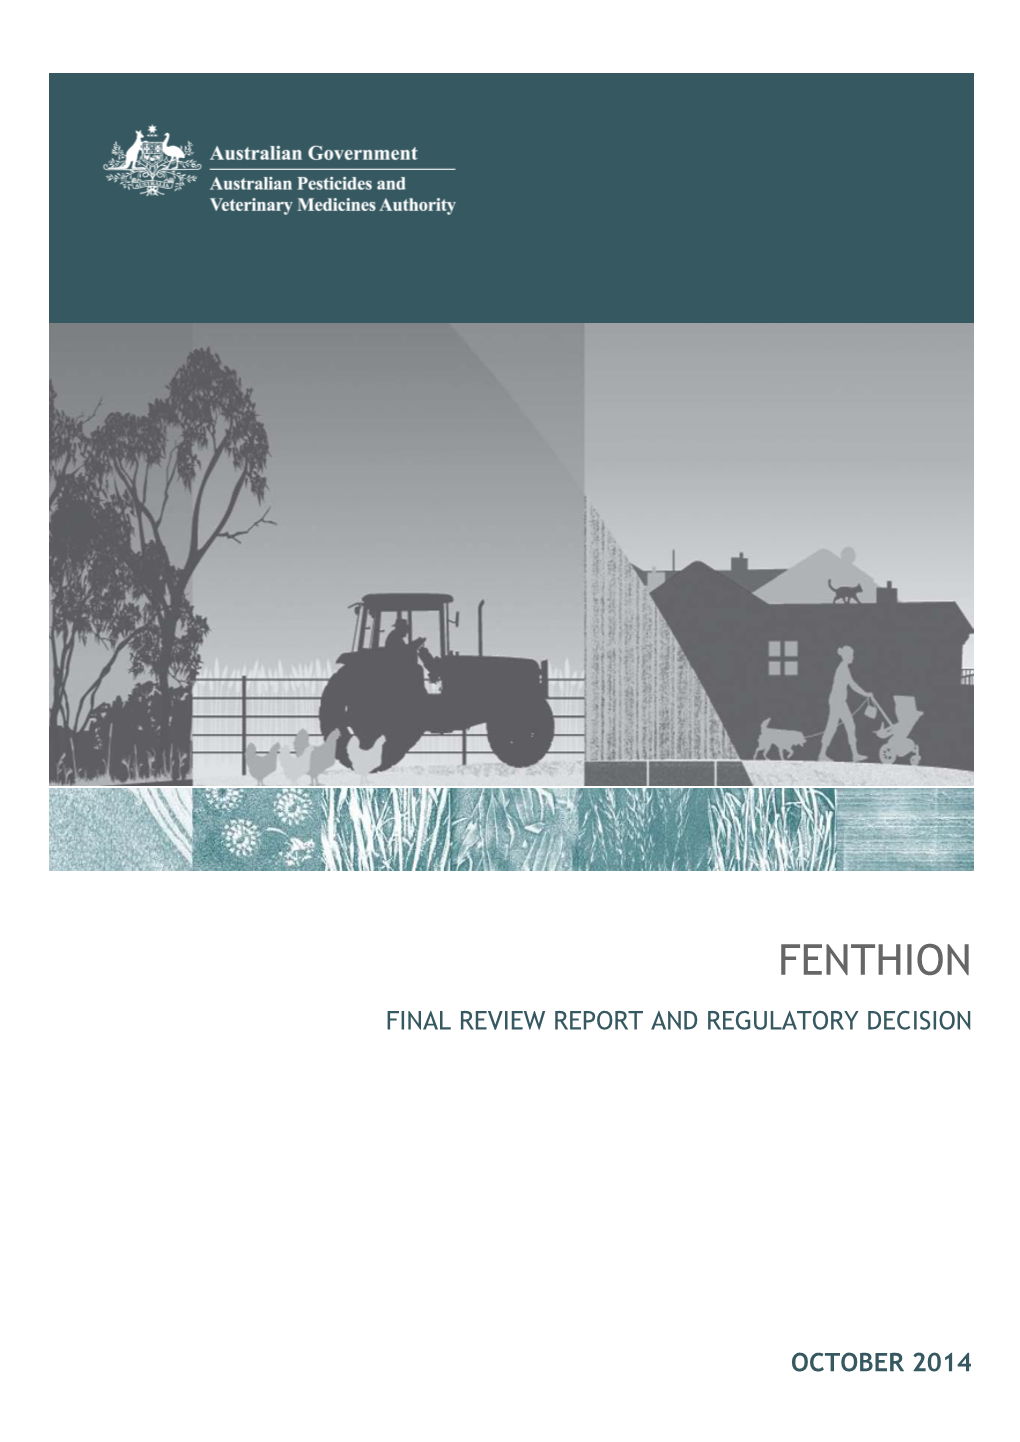 Fenthion Final Review Report and Regulatory Decision